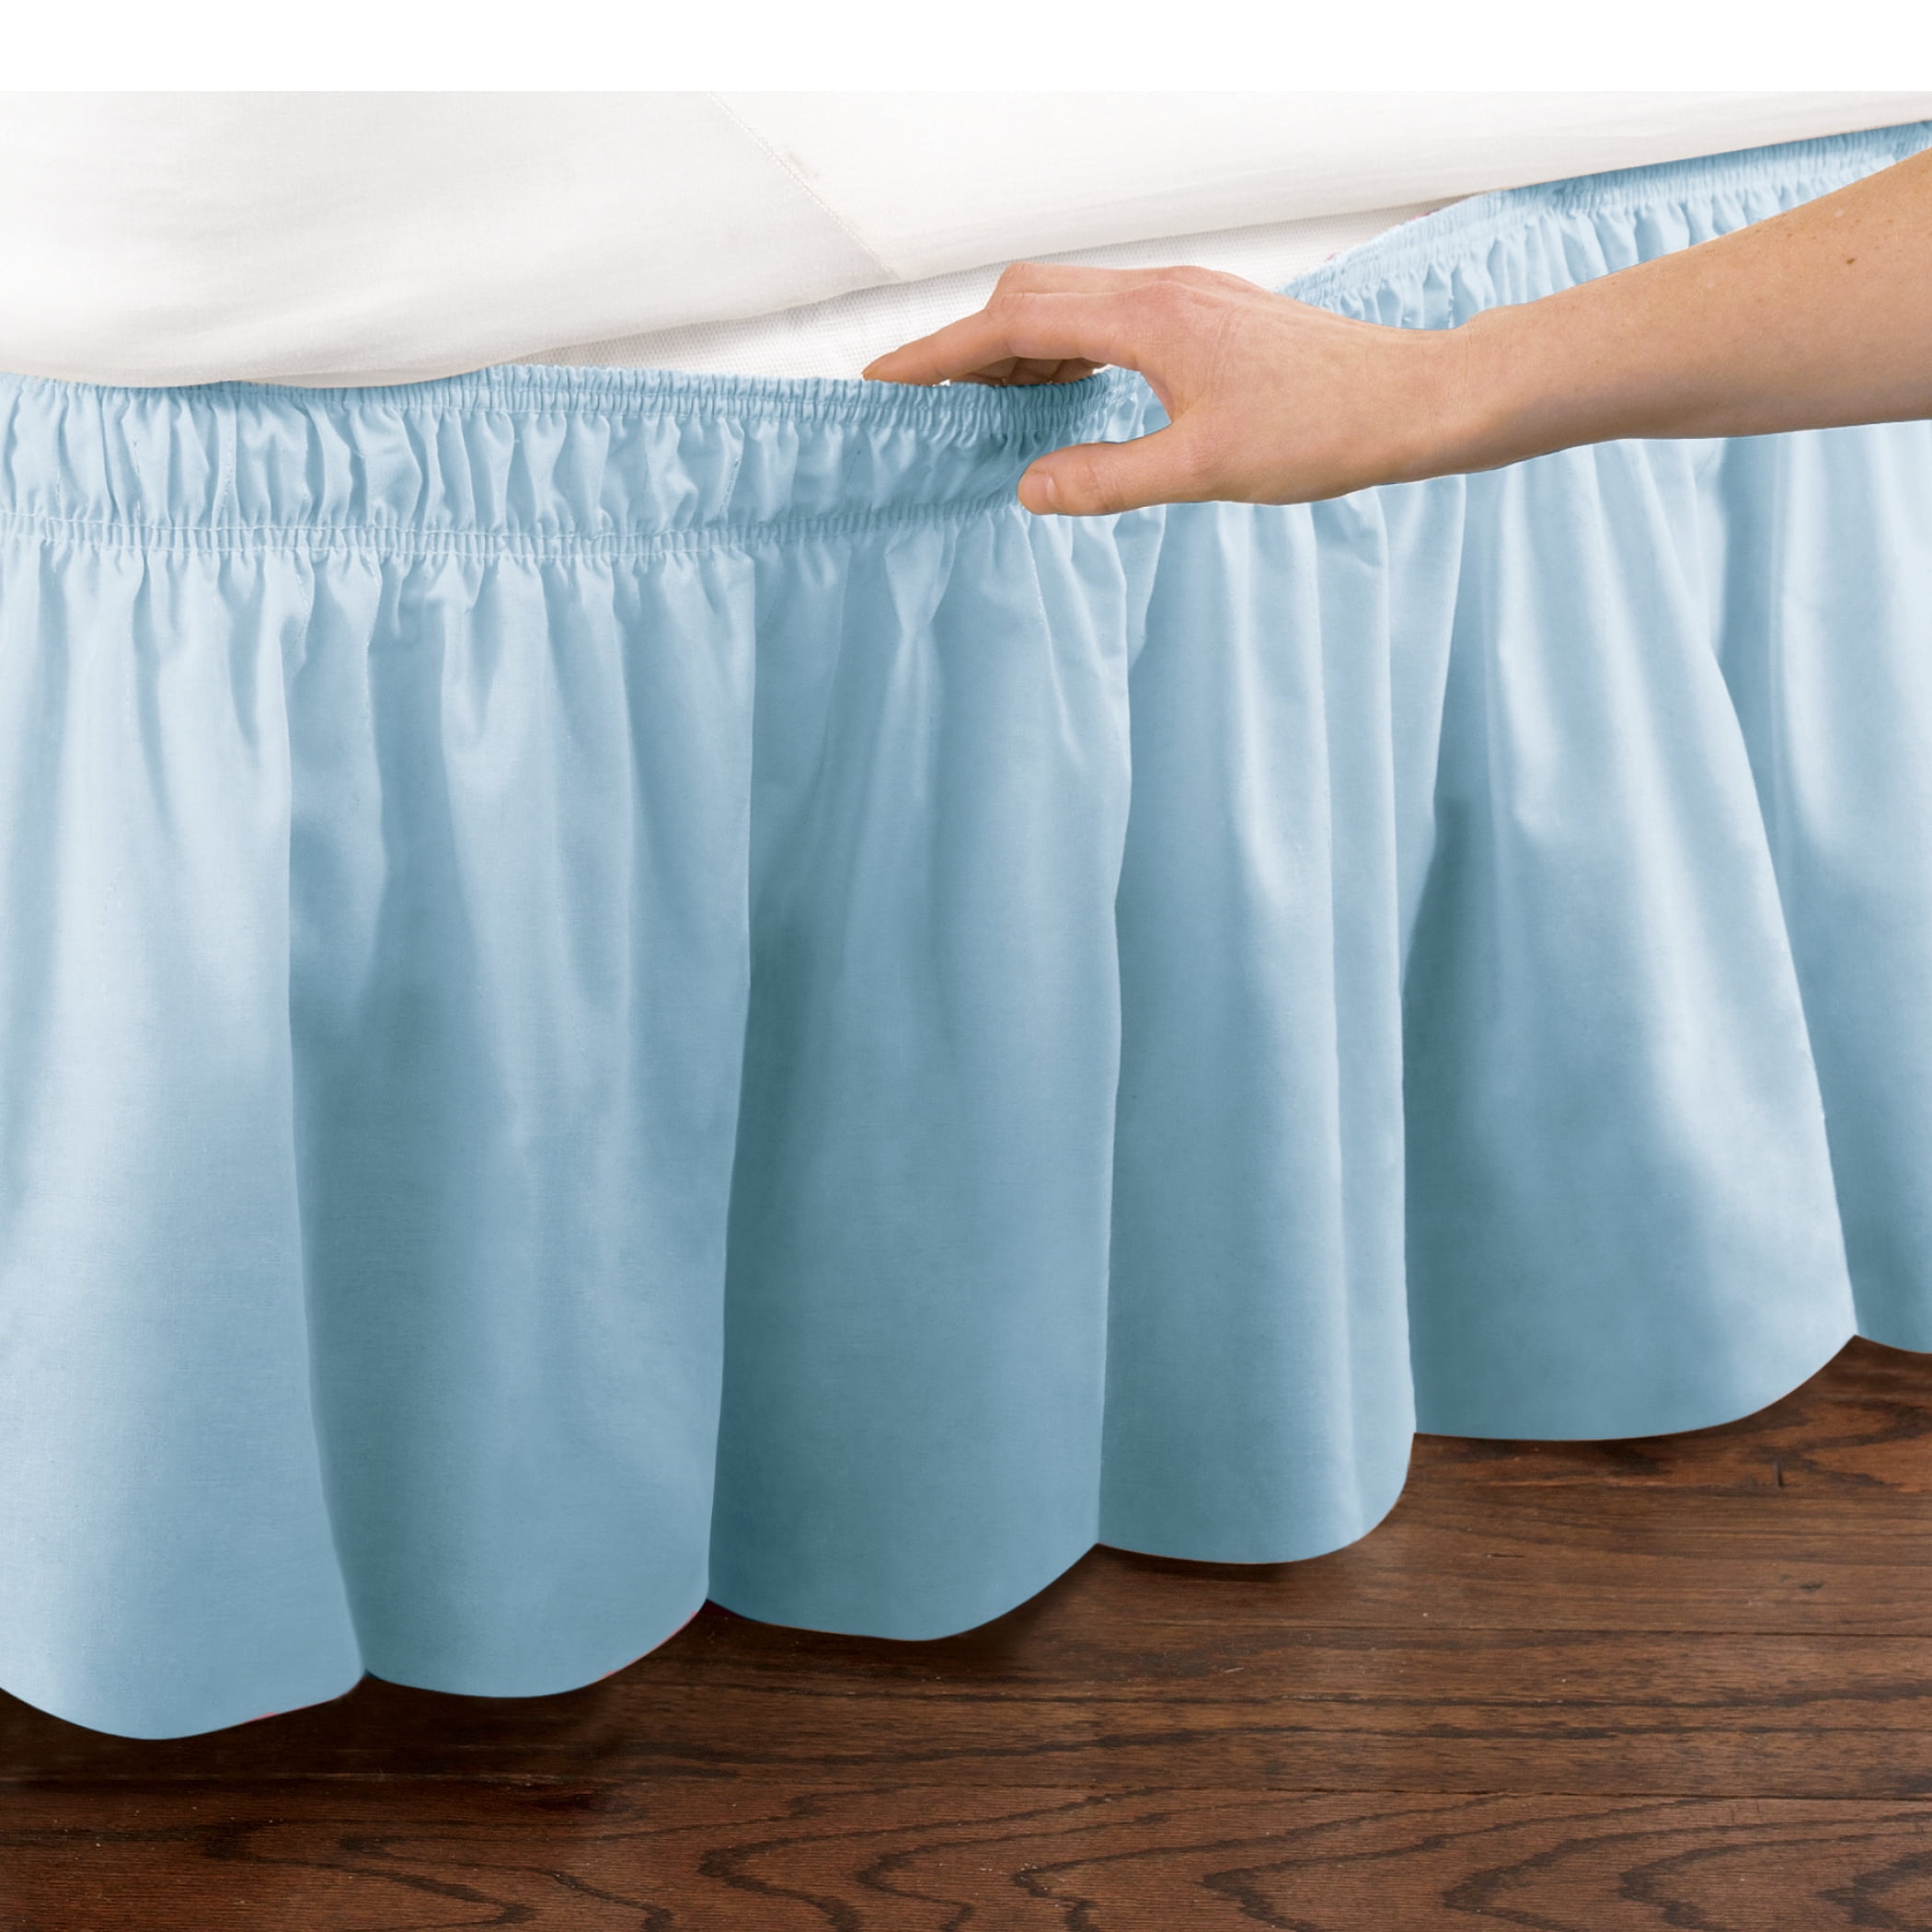 ct Discount Store Elastic Ruffle Bed Skirt Easy Warp Around King/Queen size, Bed Skirt Pins Included (King/Queen, Blue)